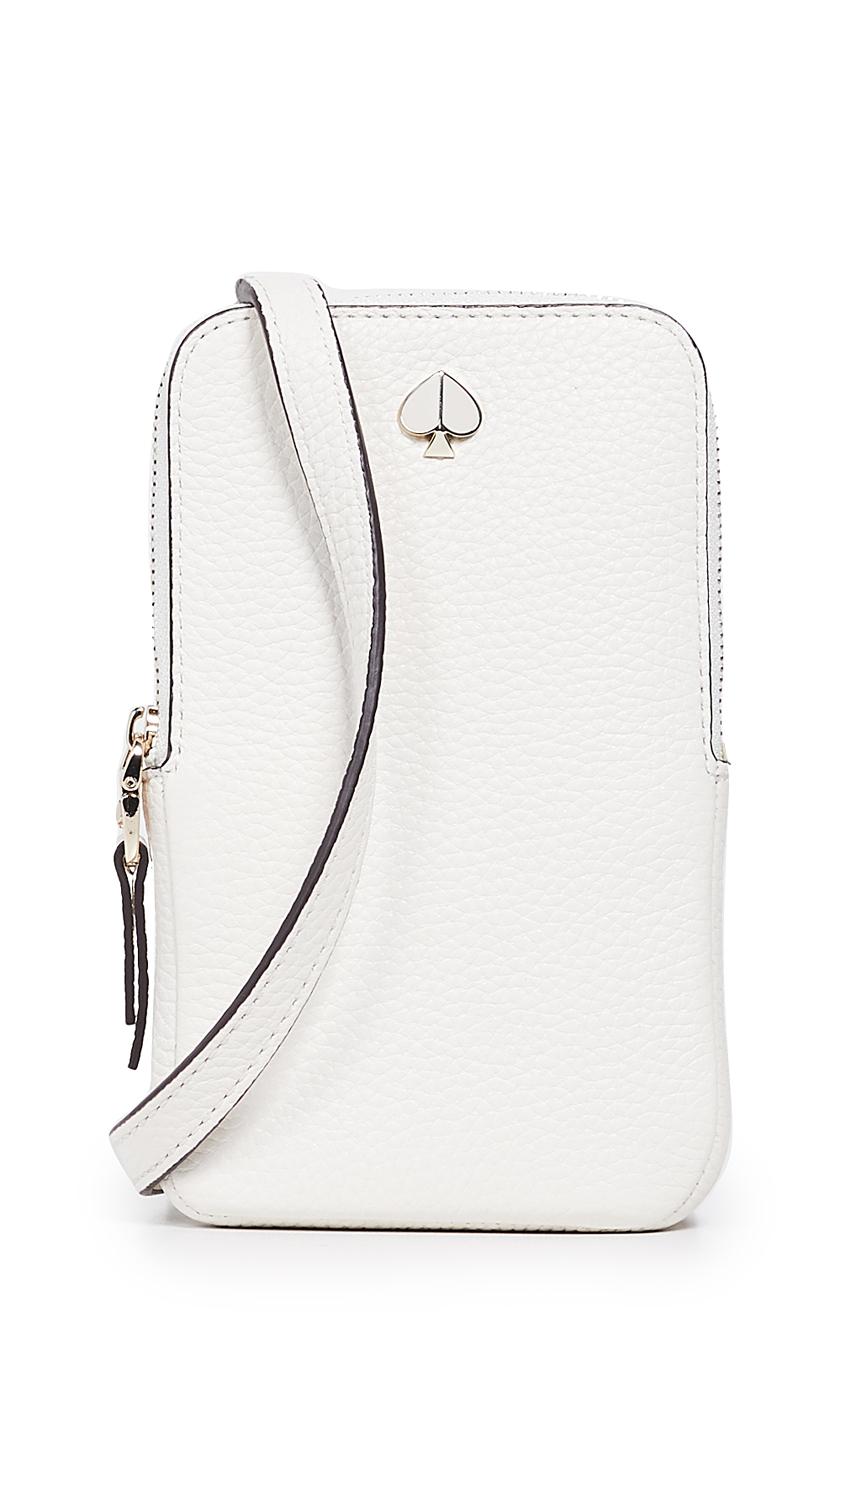 Kate Spade Leather Polly North South Phone Crossbody Bag - Lyst